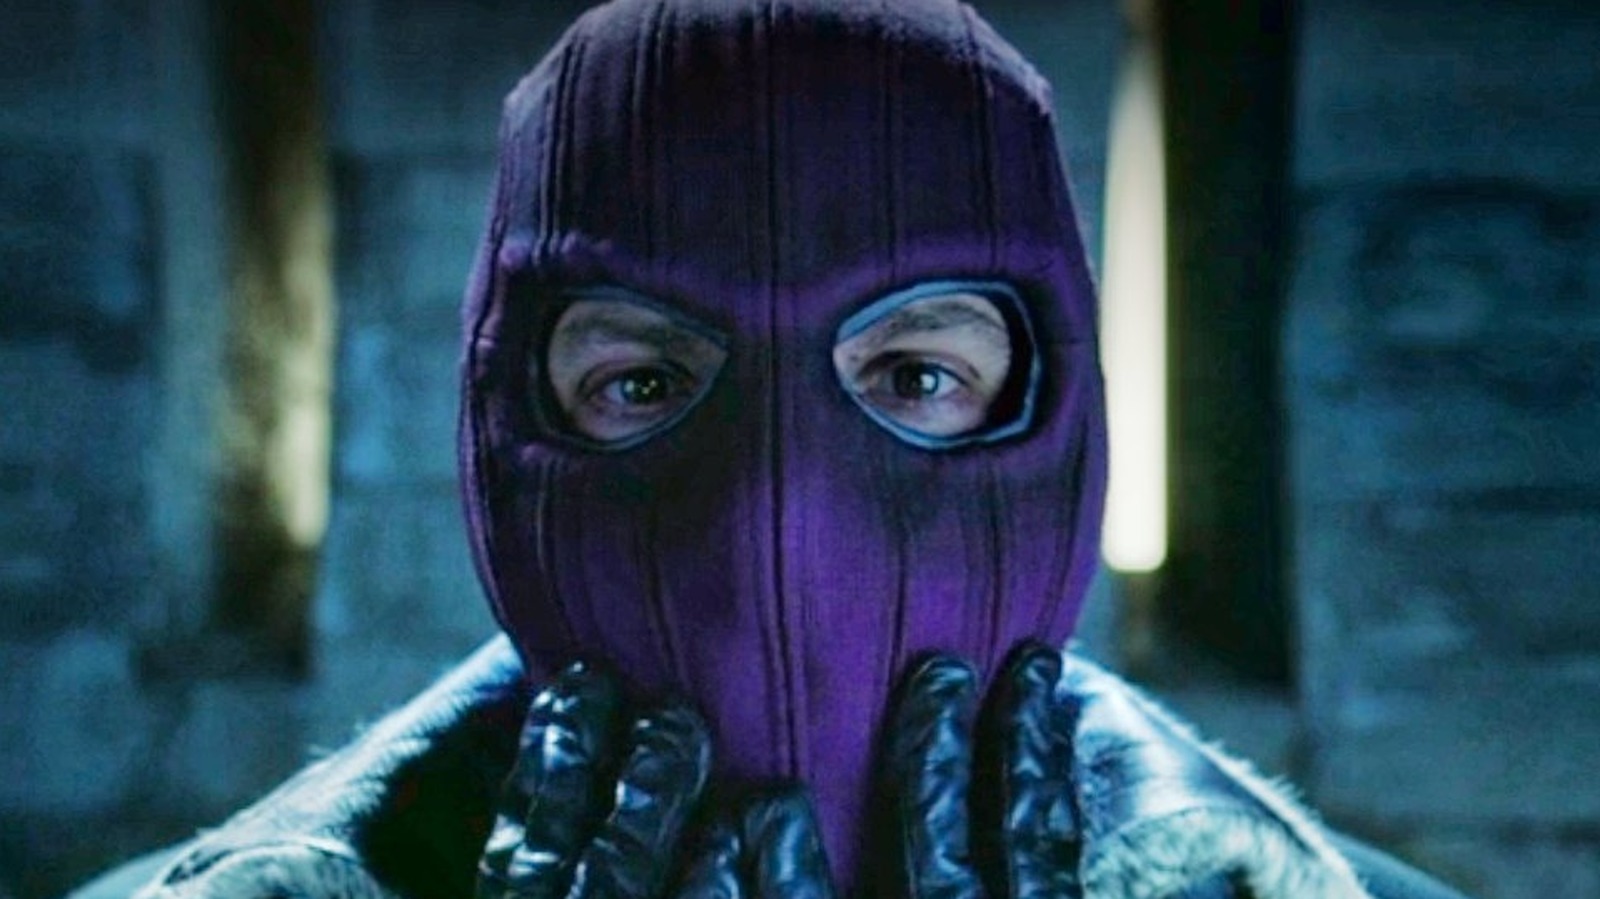 Who's The Purple Mask In The And The Winter Soldier?